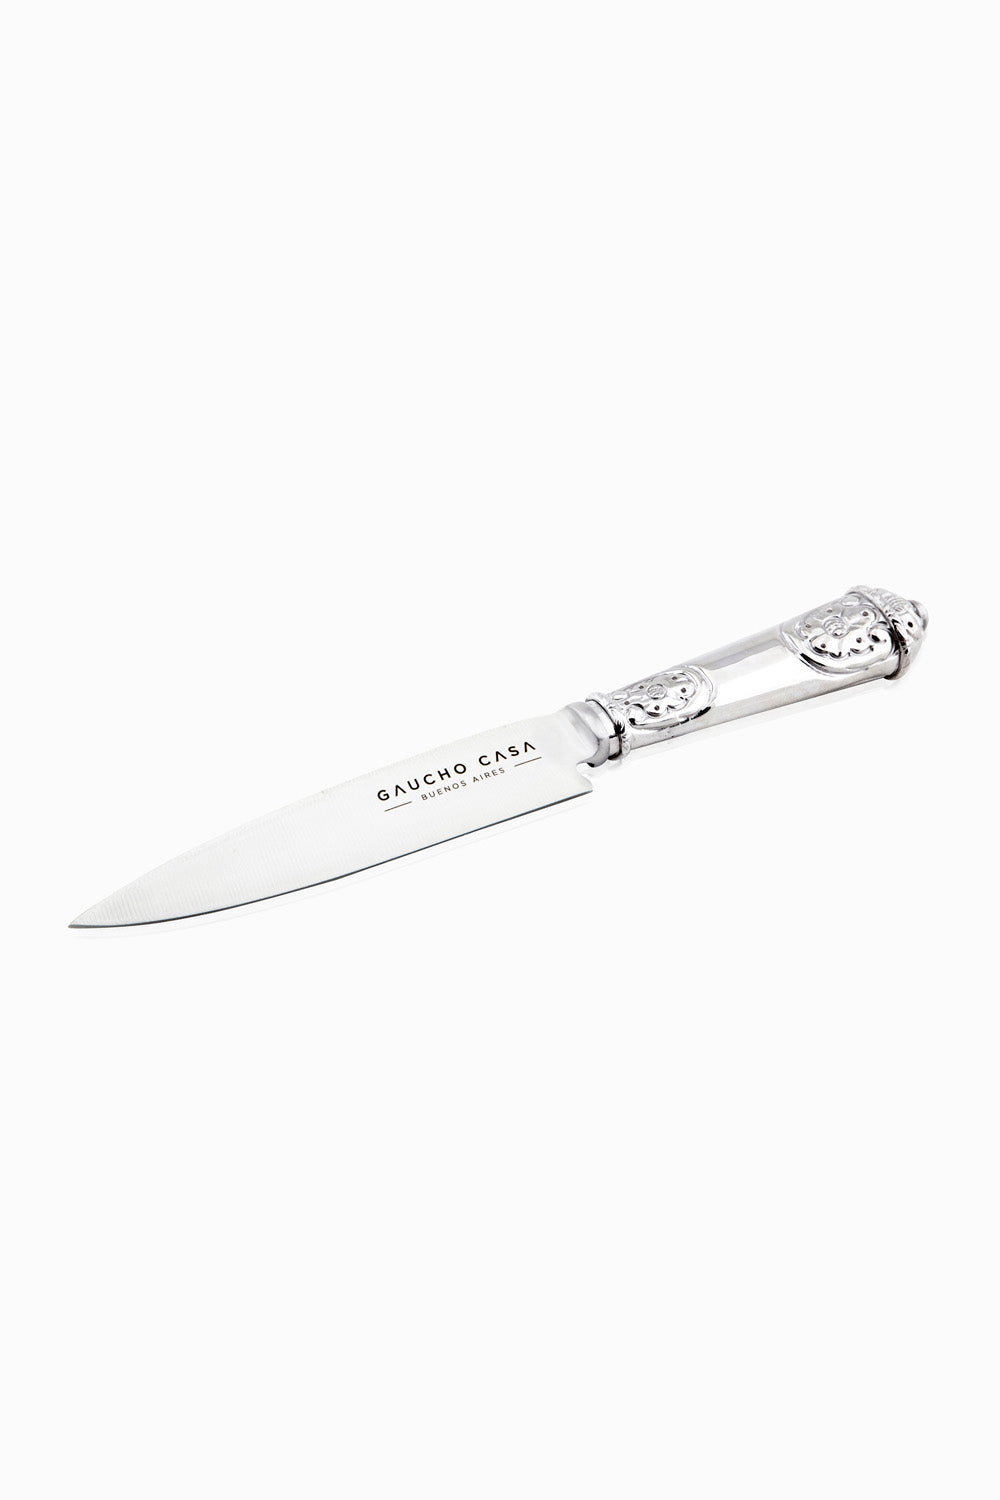 Luxury Tandil Knife With Ceibo Flower Adorned Silver Coated Handle and Sheath